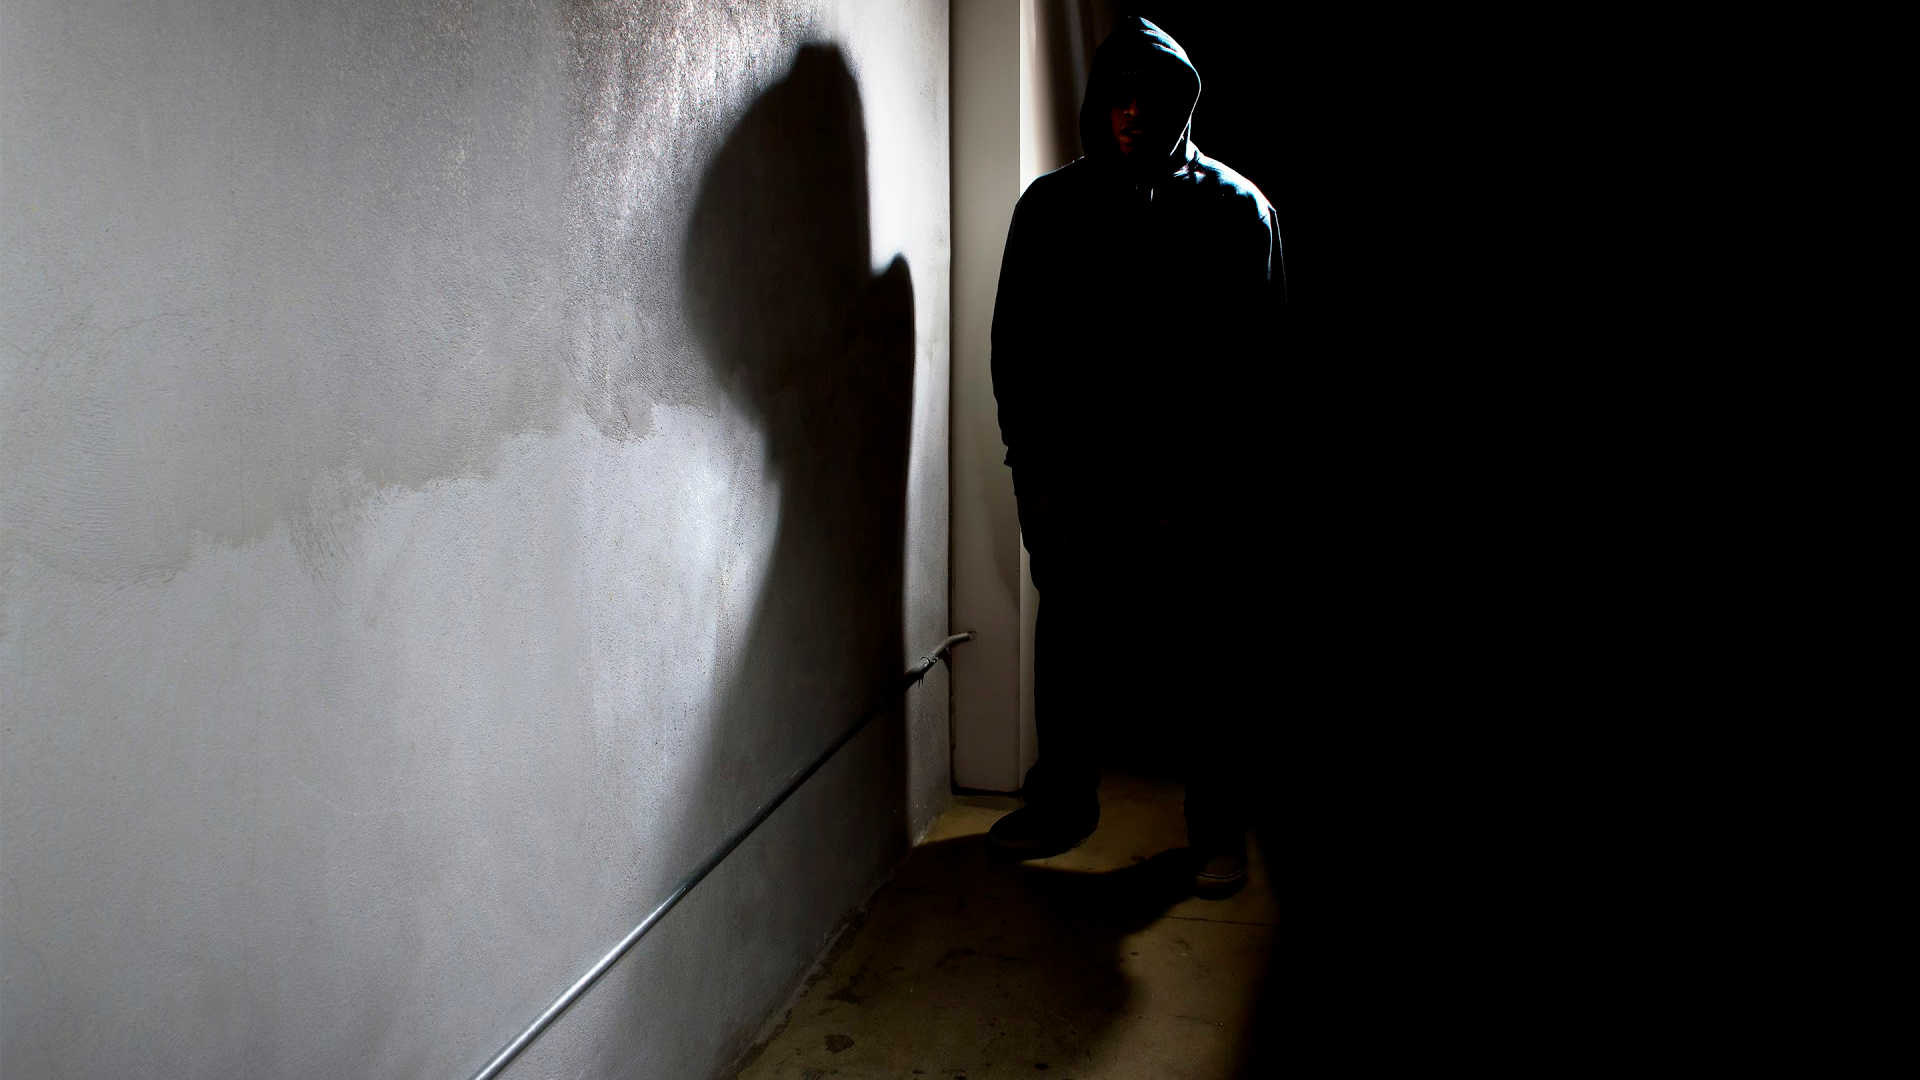 hooded criminal stalking in the shadows of a dark street alley